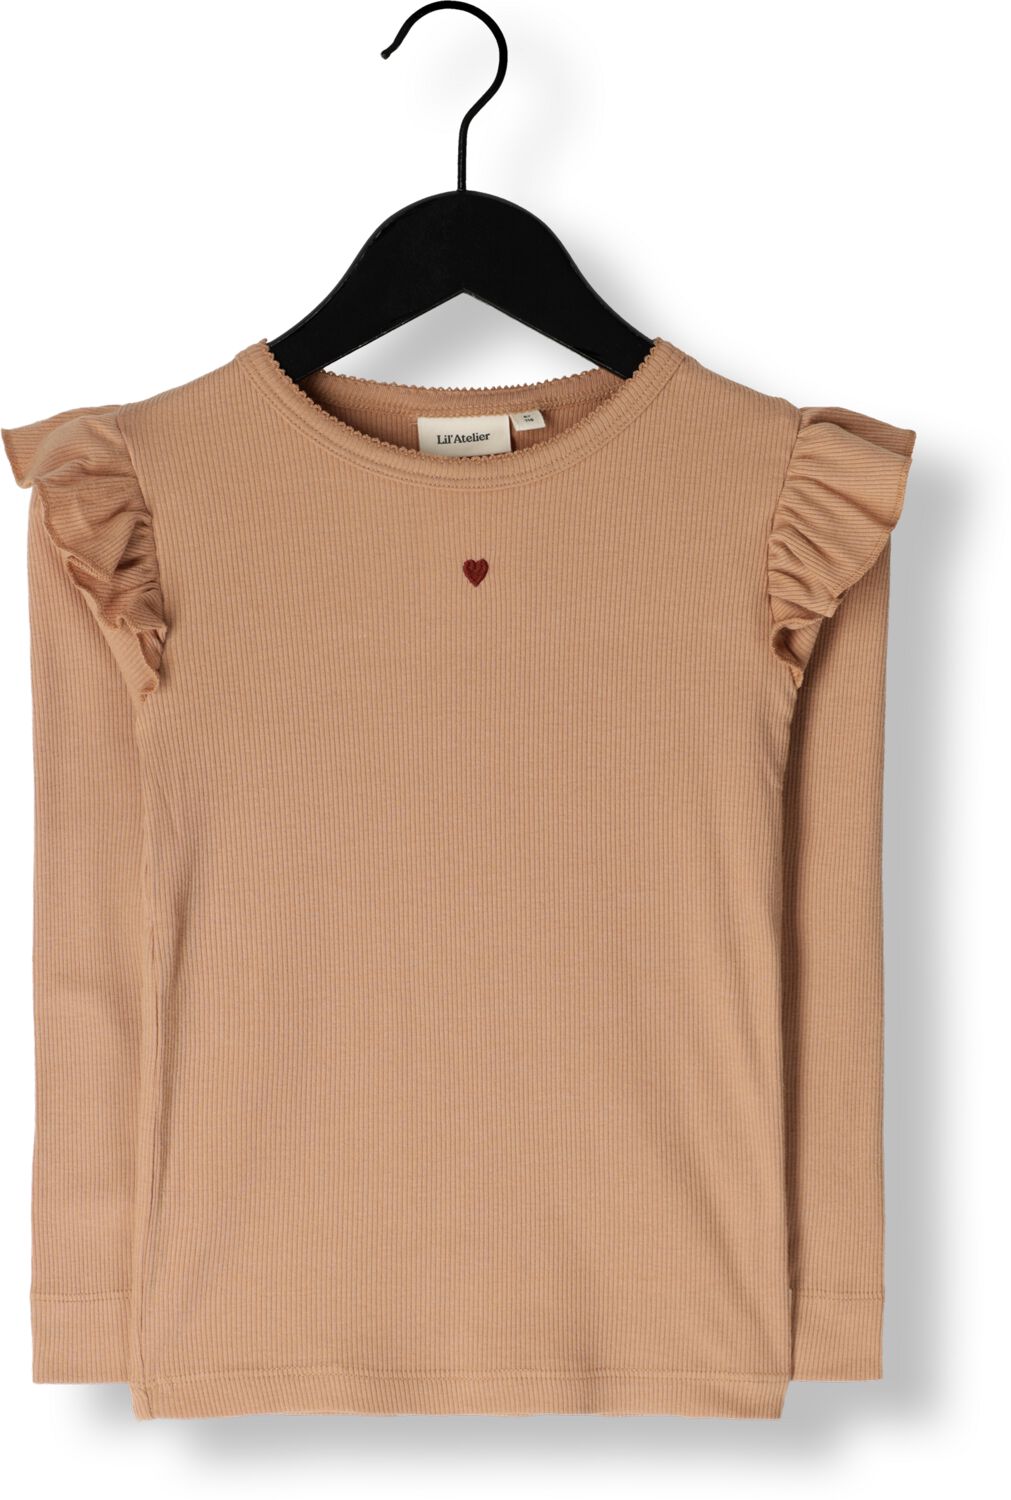 LIL' ATELIER Meisjes Tops & T-shirts Nmfgago Kuo Slim Top Emb Taupe